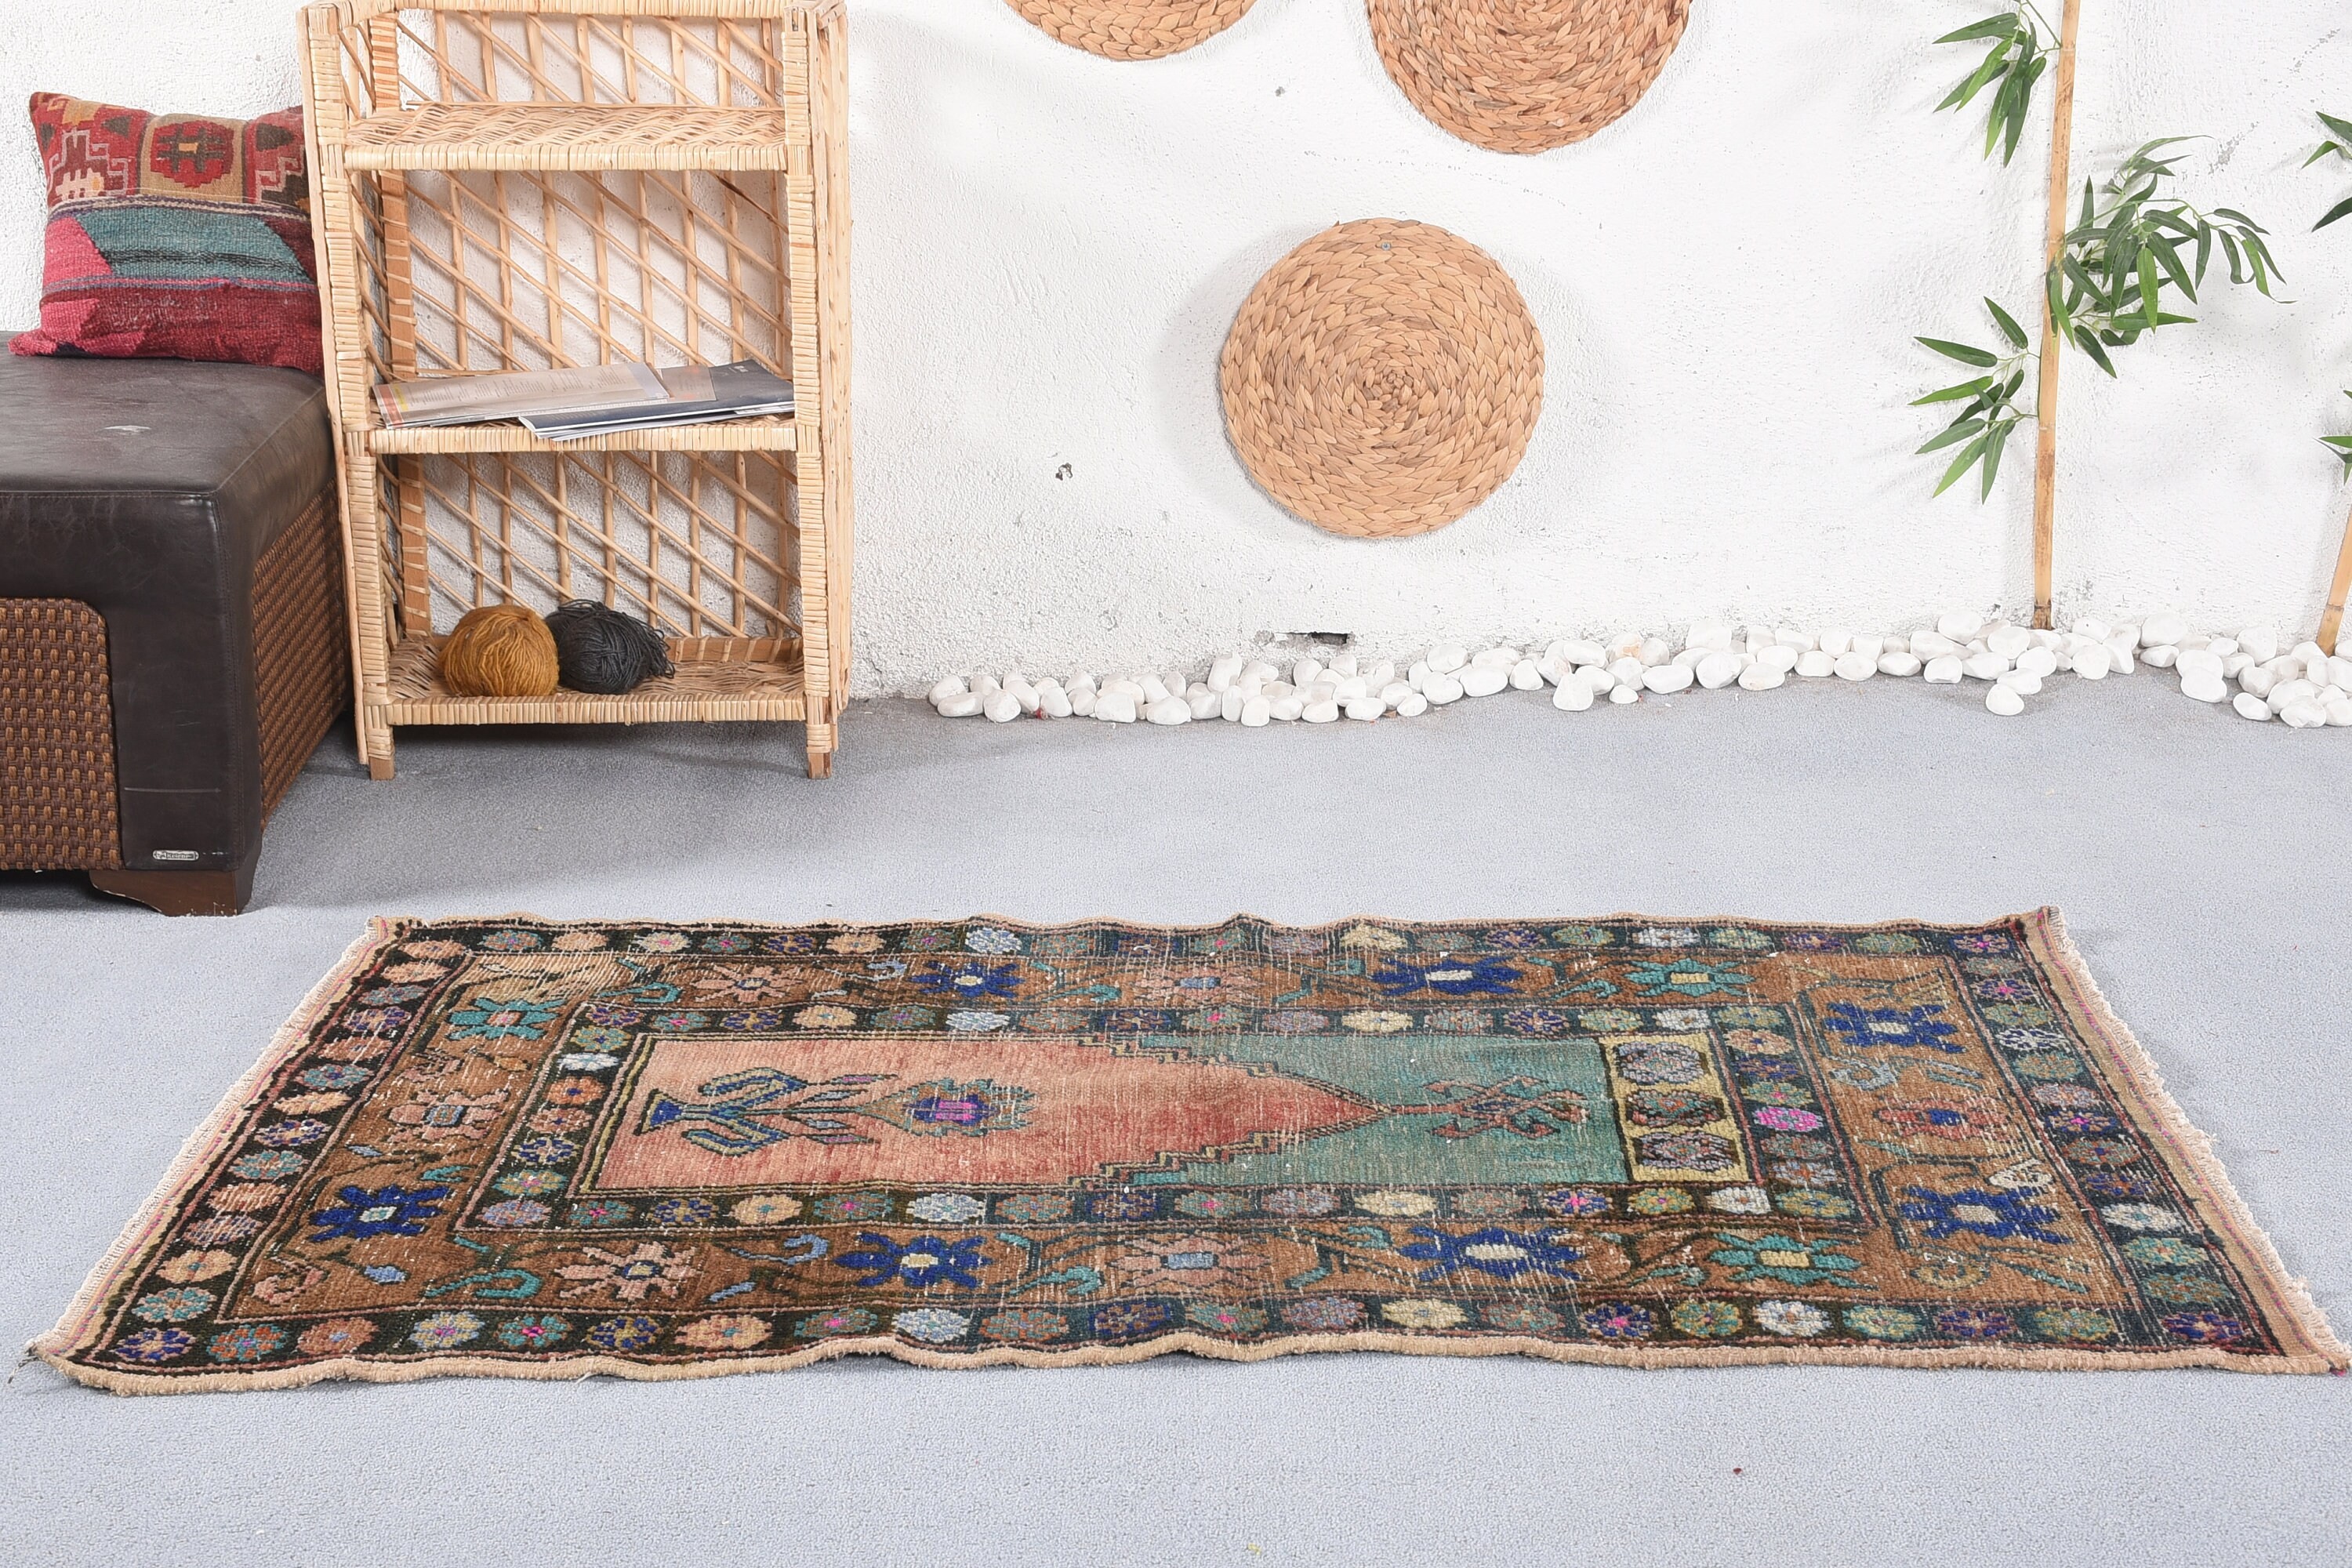 Vintage Rugs, Rugs for Entry, Entry Rug, Moroccan Rug, Blue  3.2x5.1 ft Accent Rugs, Turkish Rugs, Nursery Rug, Wool Rugs